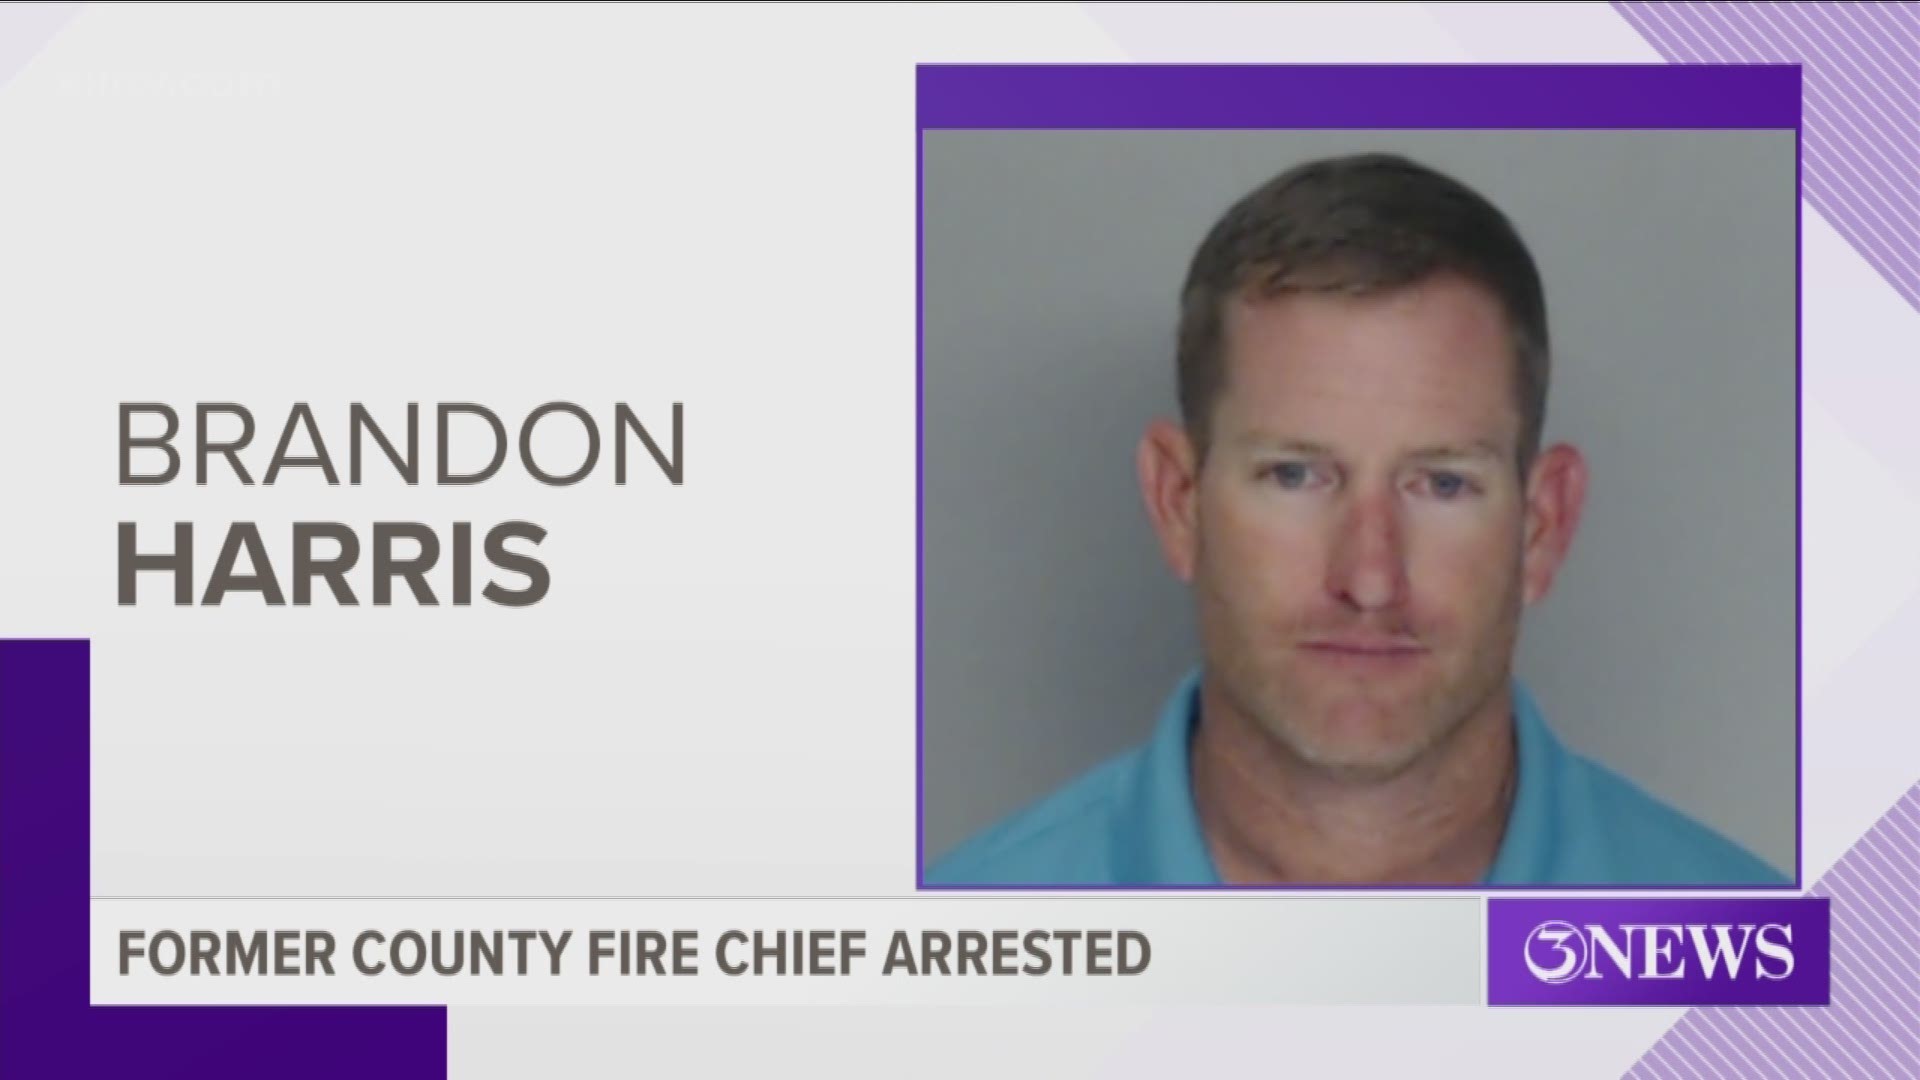 The former Fire Chief is accused of impersonating a deputy.